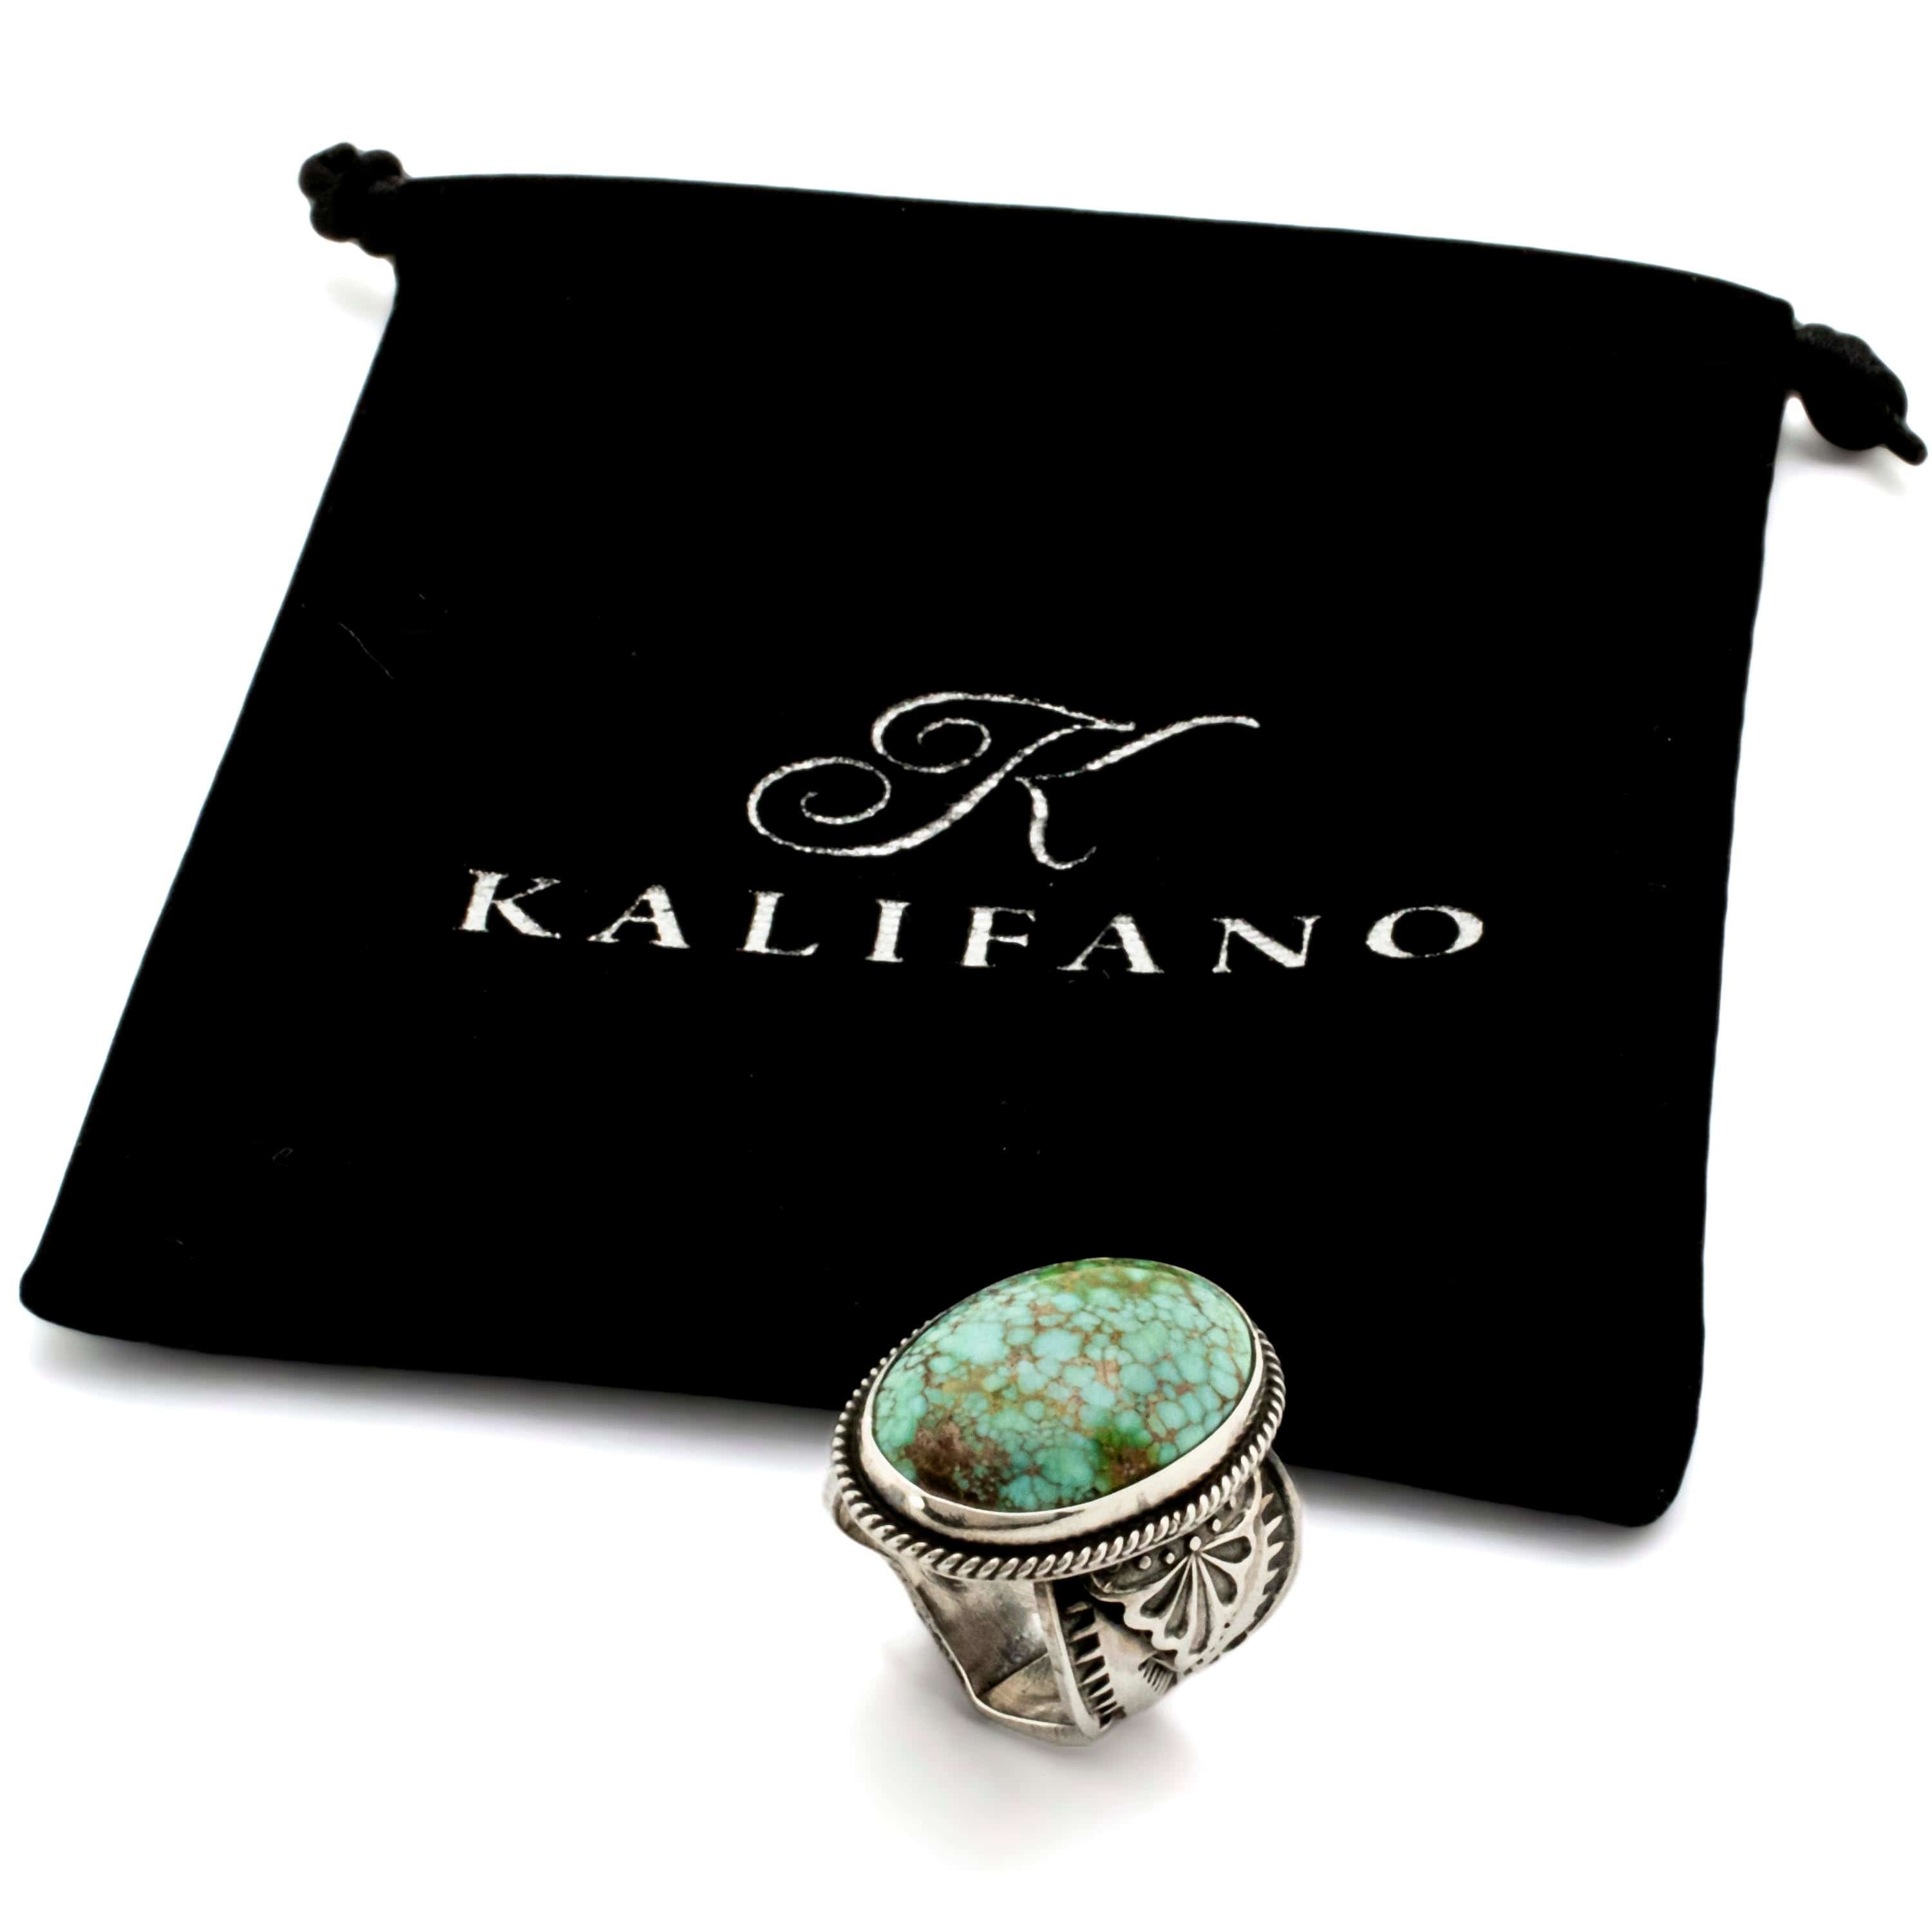 Kalifano Native American Jewelry 7 Sunshine Reeves Sonoran Gold Turquoise USA Native American Made 925 Sterling Silver Ring NAR1400.015.7